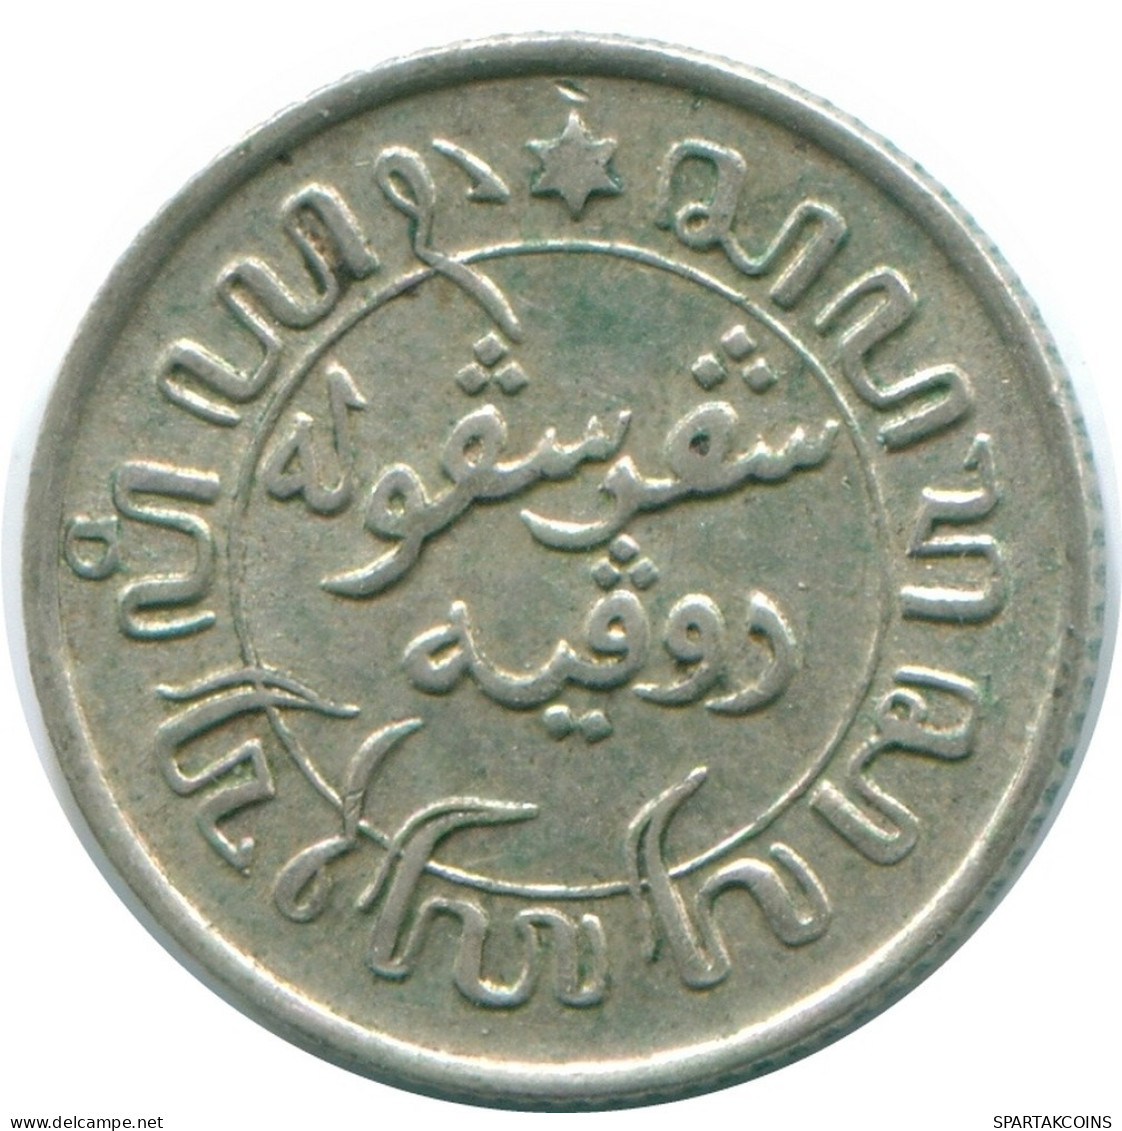 1/10 GULDEN 1941 P NETHERLANDS EAST INDIES SILVER Colonial Coin #NL13586.3.U.A - Indes Neerlandesas